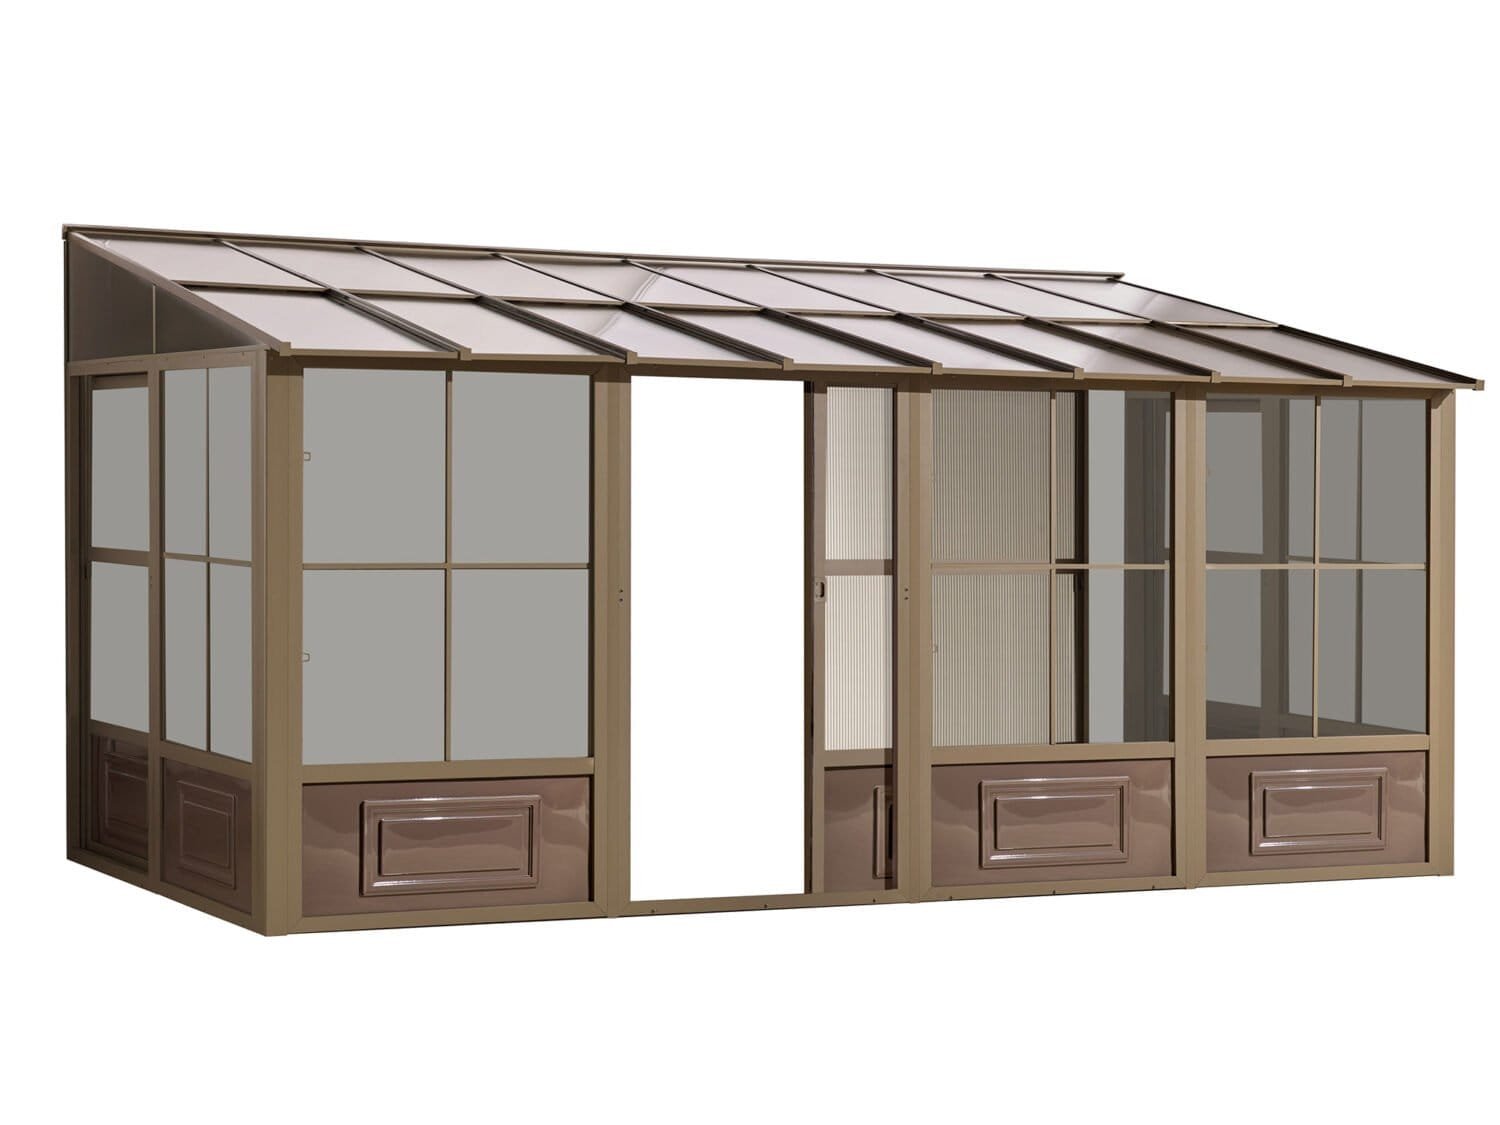 Florence Wall Mounted Solarium 8x16 Polycarbonate Roof W1608 12 060051019055 (3)